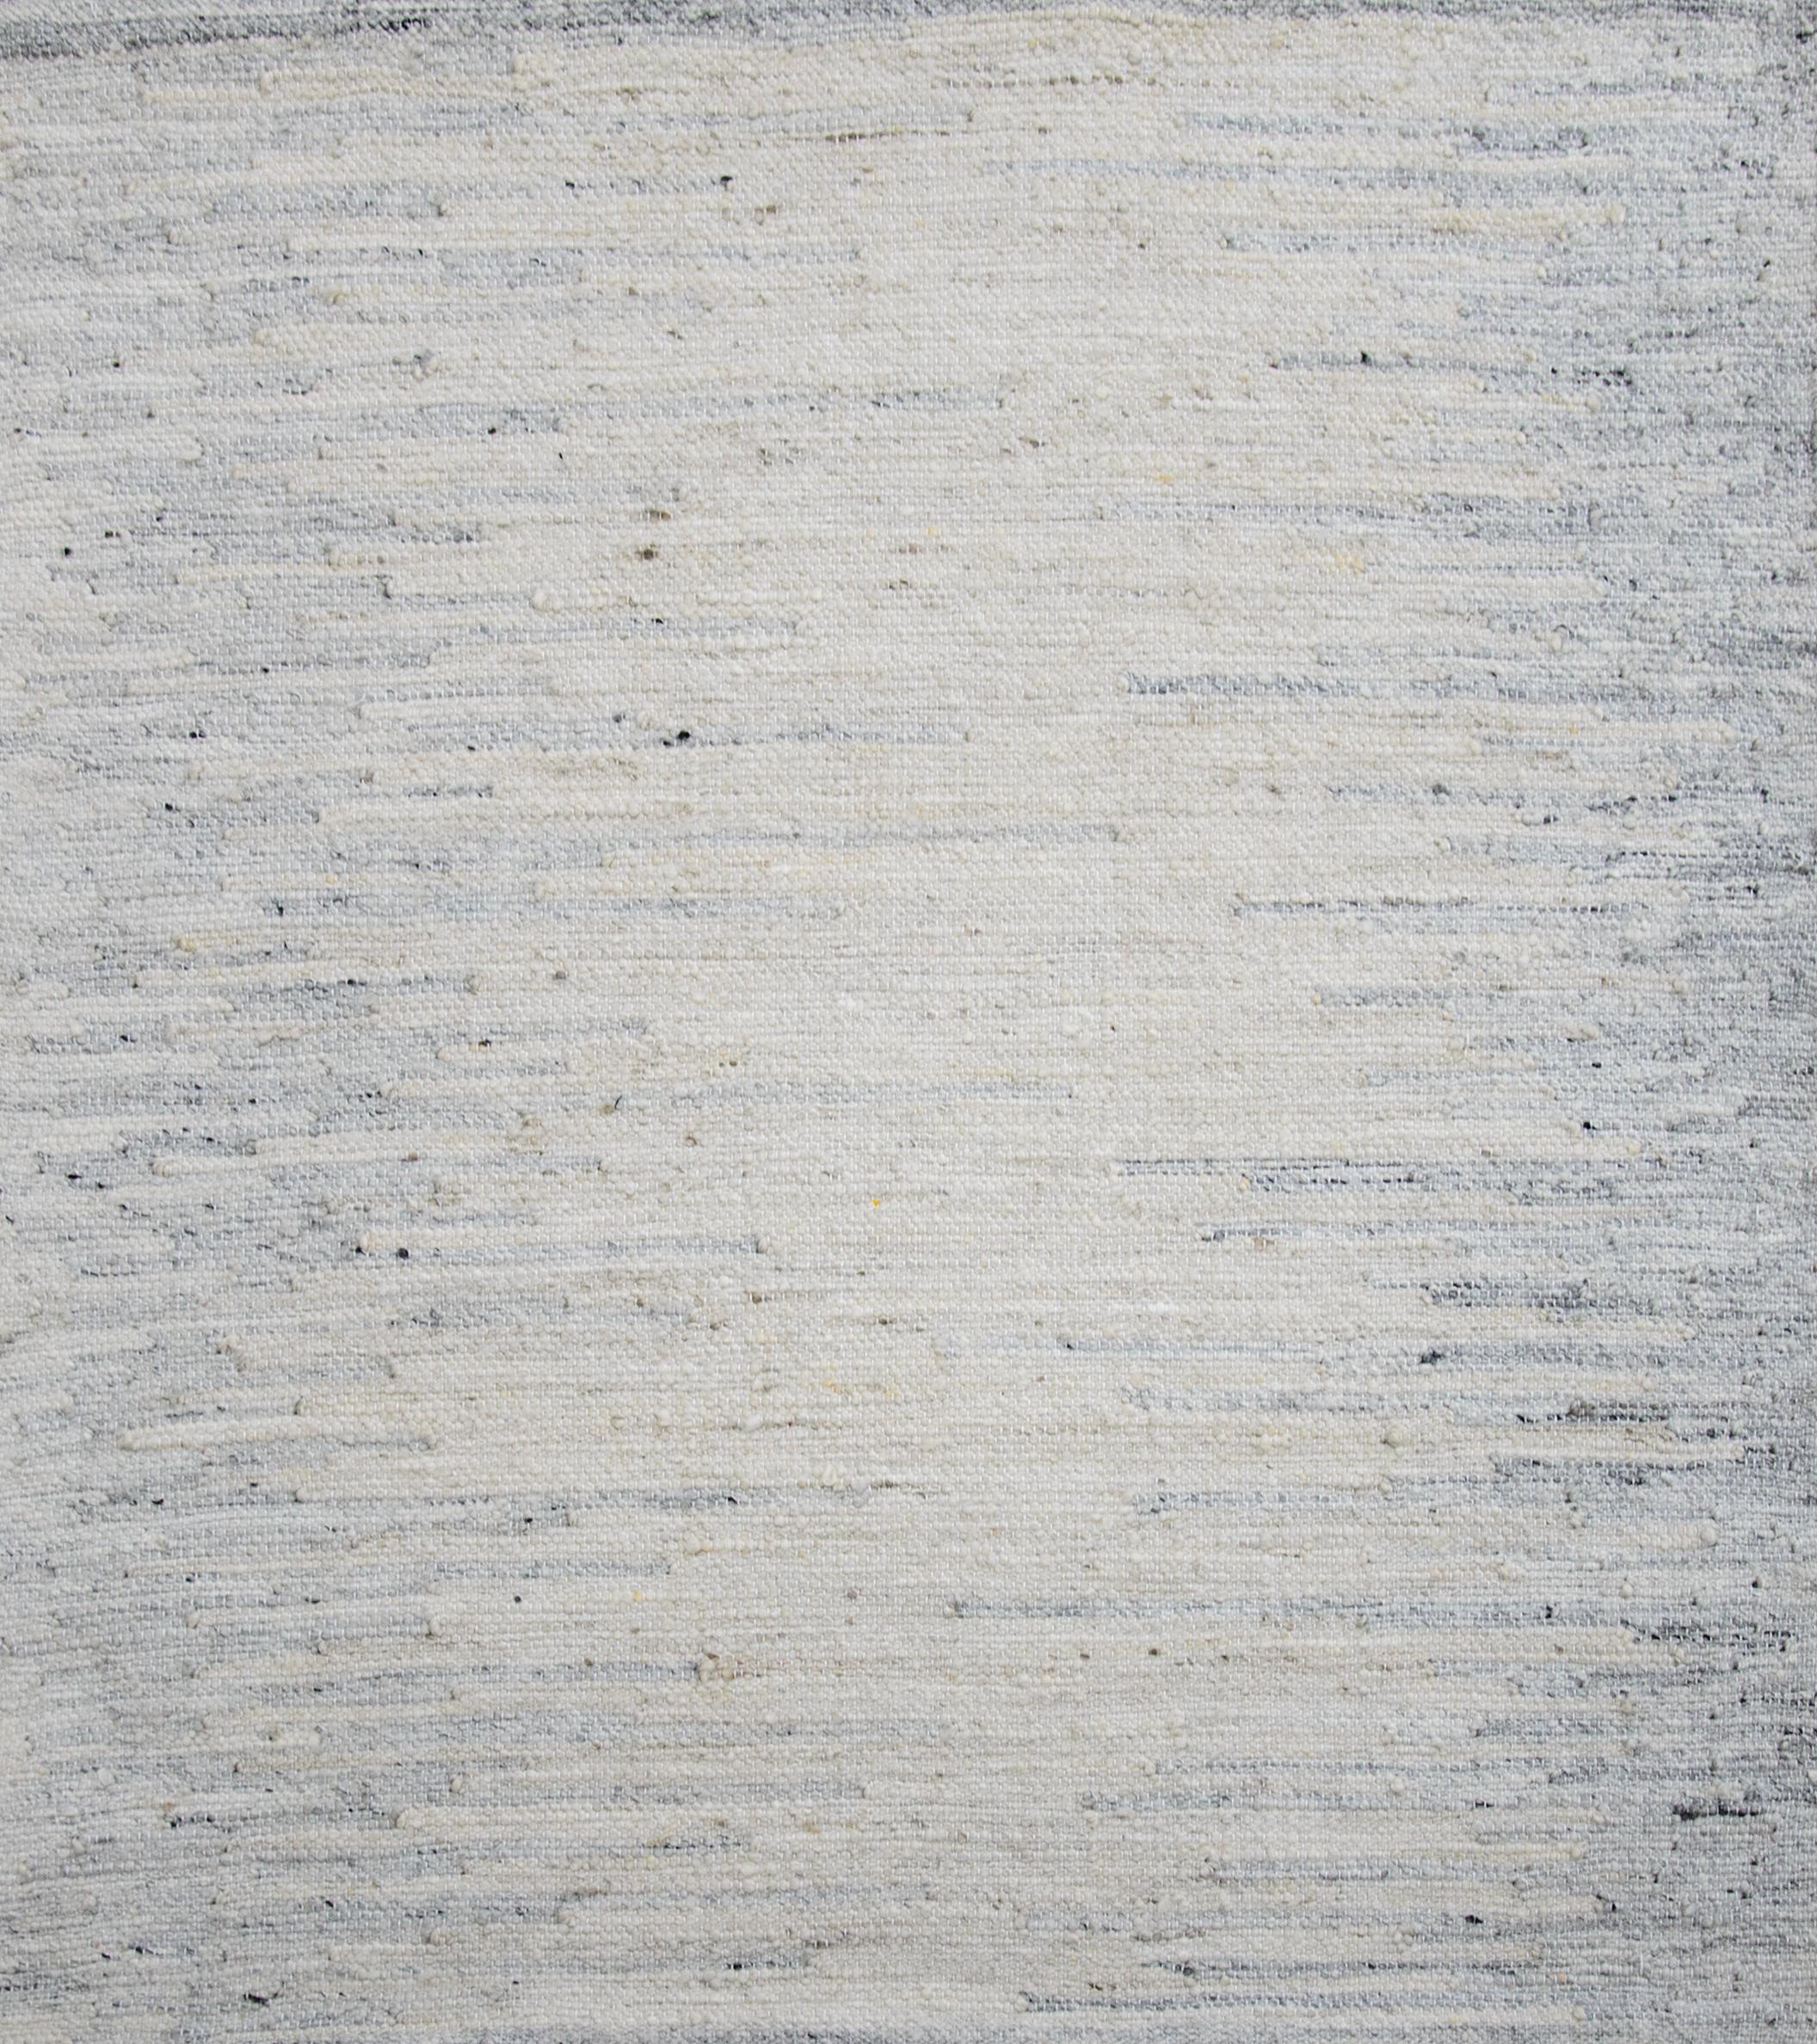 Modern area rug handwoven in Scandinavian design using fine wool and organic dyes. It features an exquisite ivory field with gray ‘Seismograph’ wave design patterns all-over. This piece will surely look fabulous in modern and contemporary interiors.